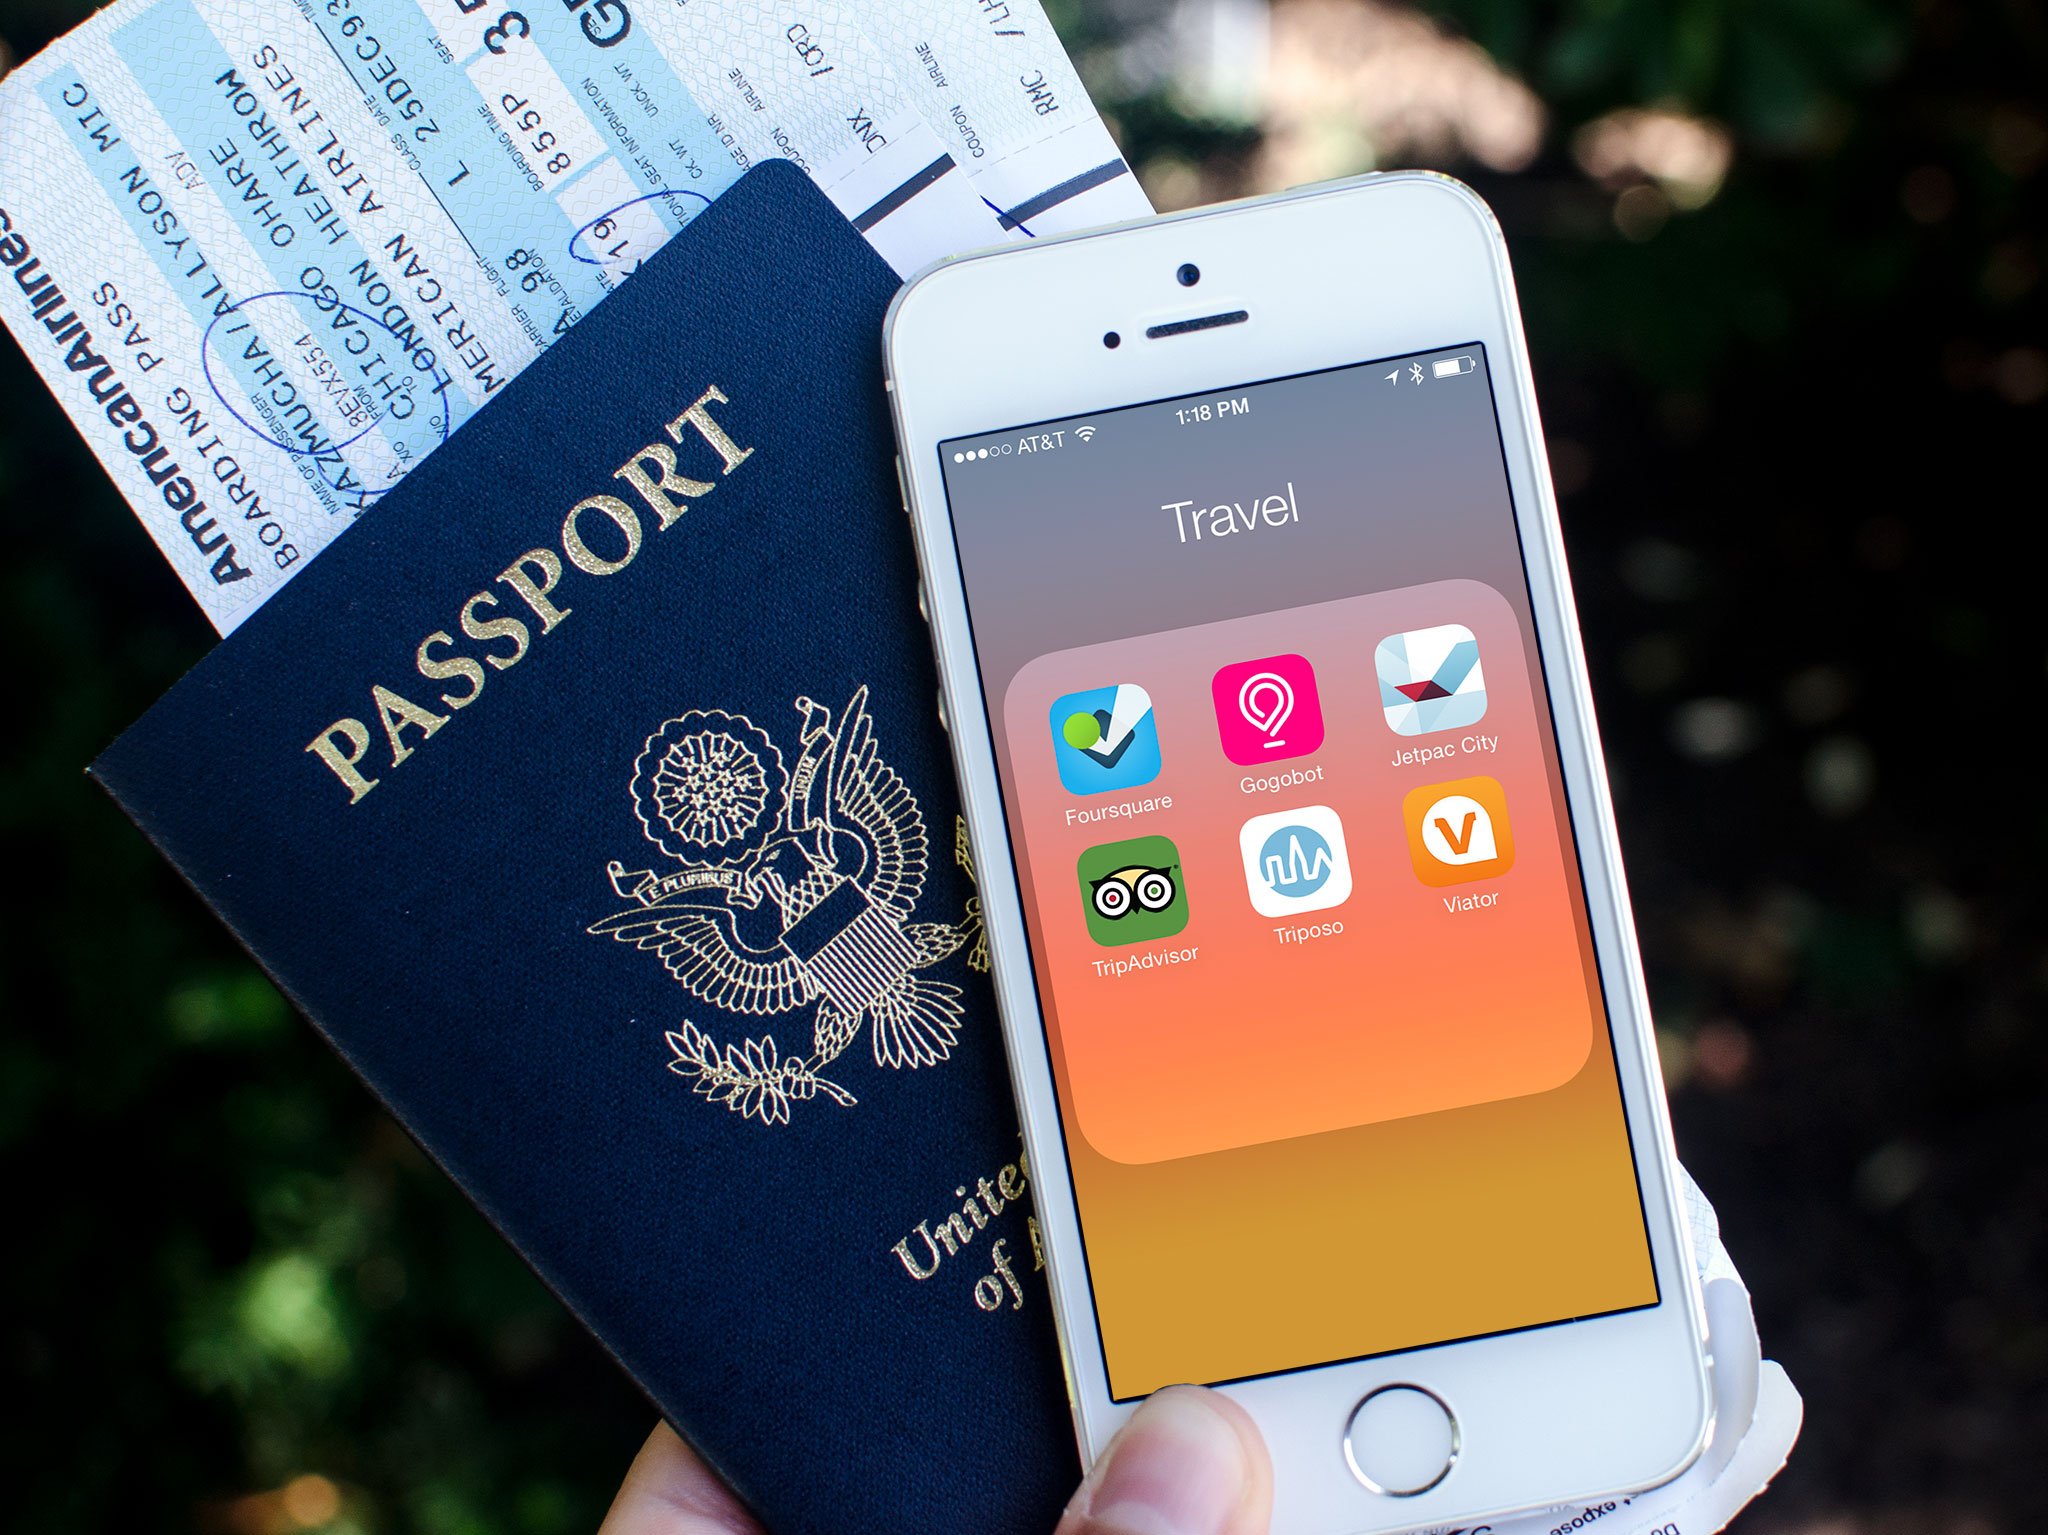 Best travel guide apps for iPhone: Foursquare, Gogobot, Jetpac City Guides, and more!